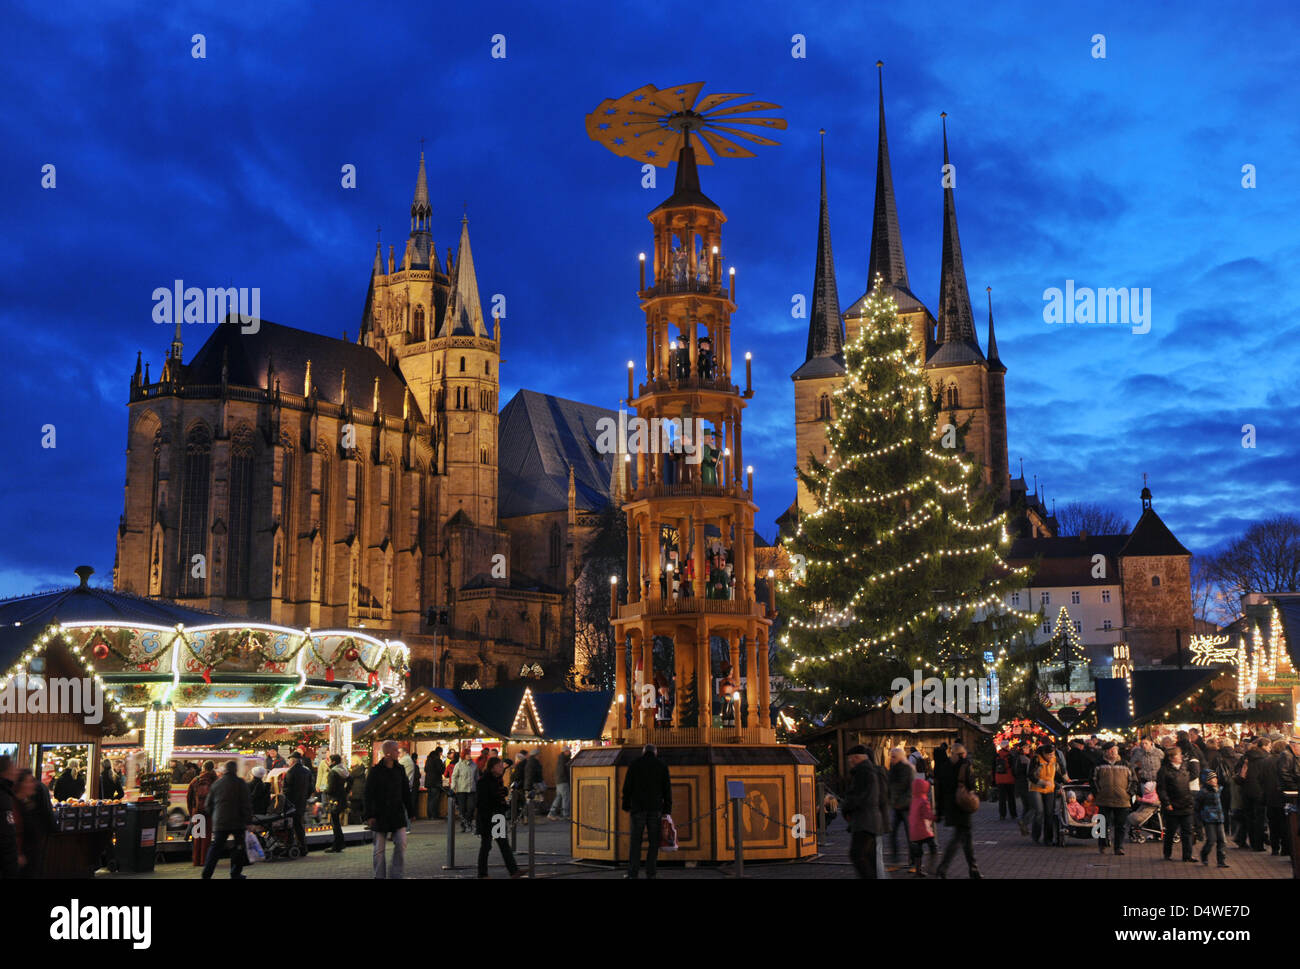 The town square in front of the Erfurt Cathedral and the Severi Church sparkles with lights in Erfurt, Germany, 24 November 2010. The 160th Christmas market expects two million visitors until 22 December 2010. Different goods and treats in about 200 wooden huts, a 25m high Christmas tree and a crib with life-sized figures are only some of the attractions of the market. Photo: Marti Stock Photo